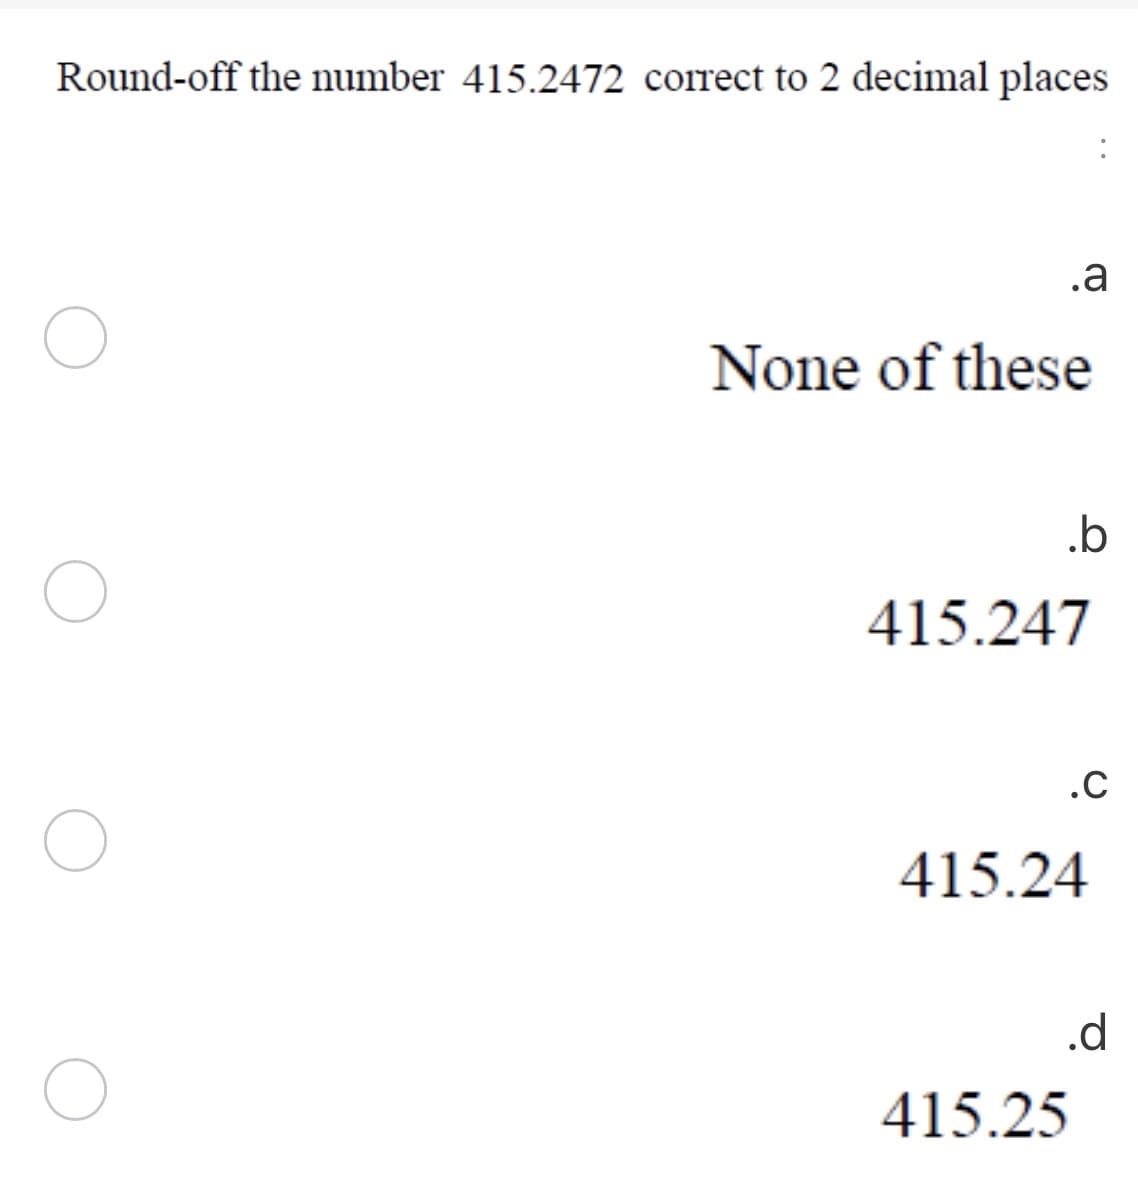 Round-off the number 415.2472 correct to 2 decimal places
.a
None of these
.b
415.247
.C
415.24
.d
415.25
